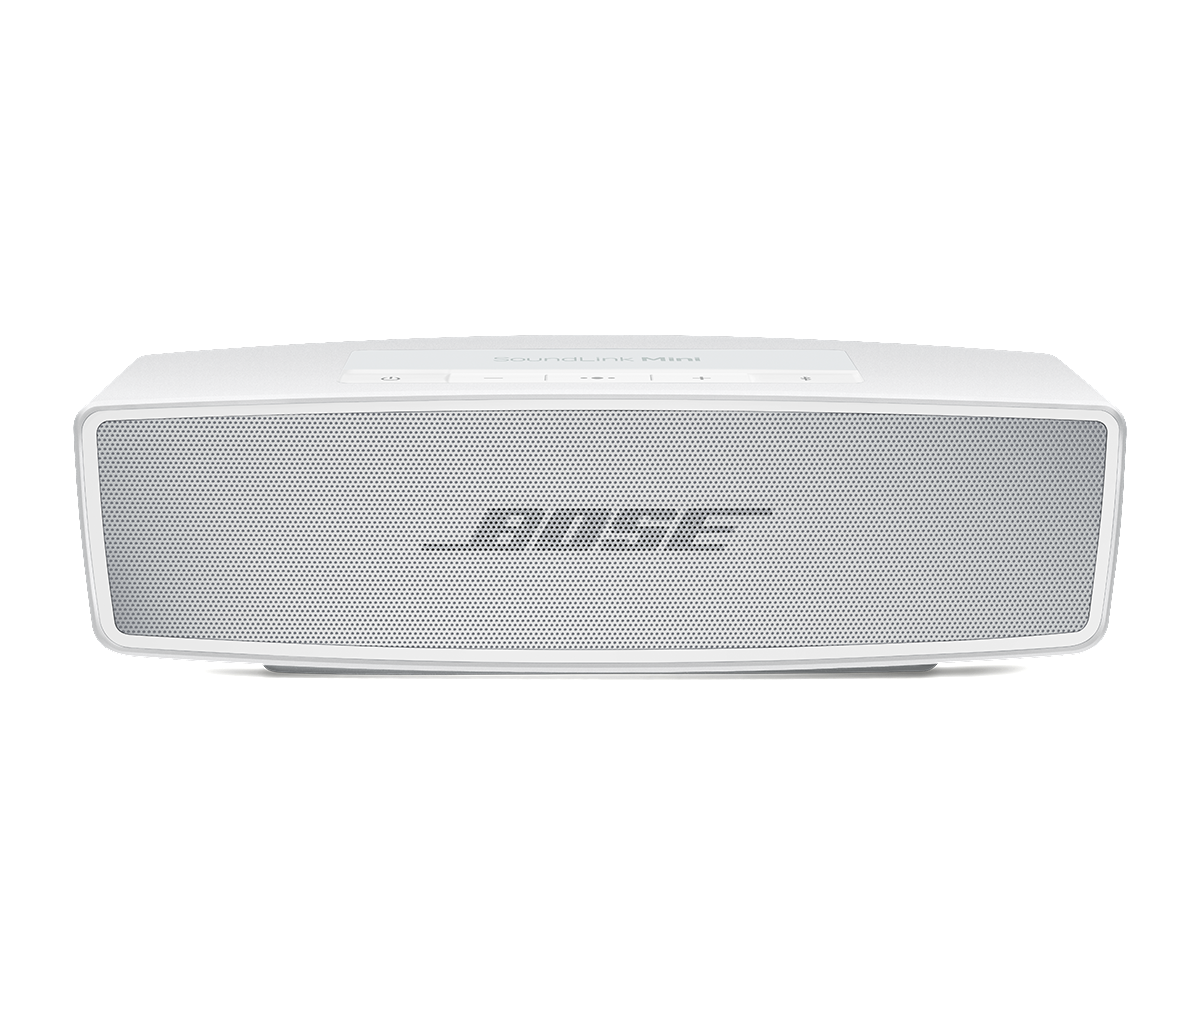 Bose SoundLink Mini II Special Edition Luxe Silver